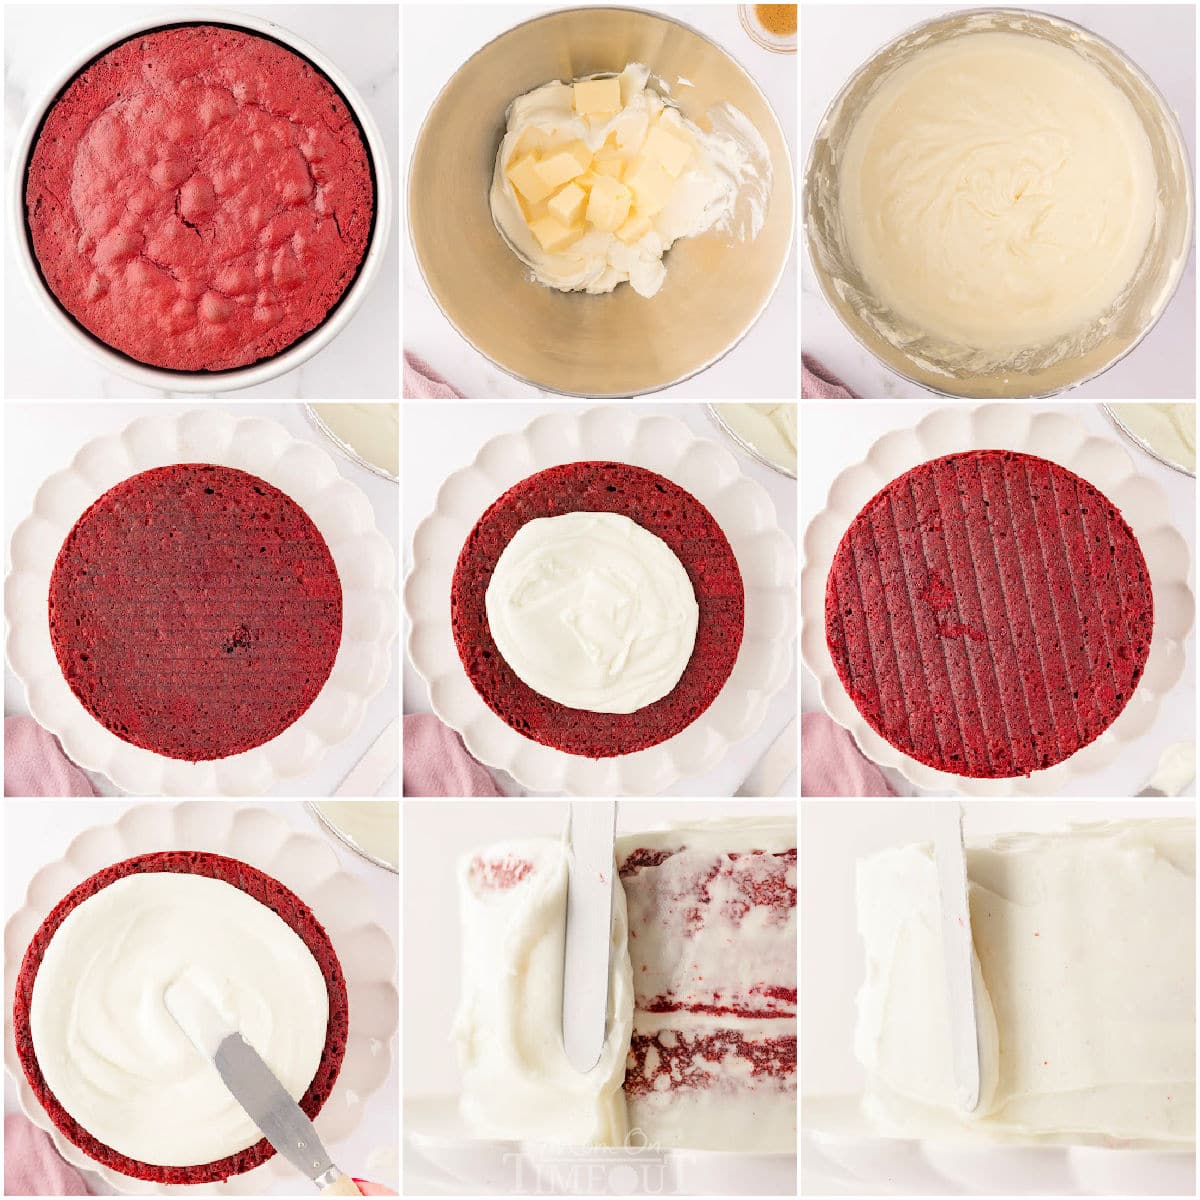 nine image collage showing how to make cream cheese frosting and frost red velvet cake.